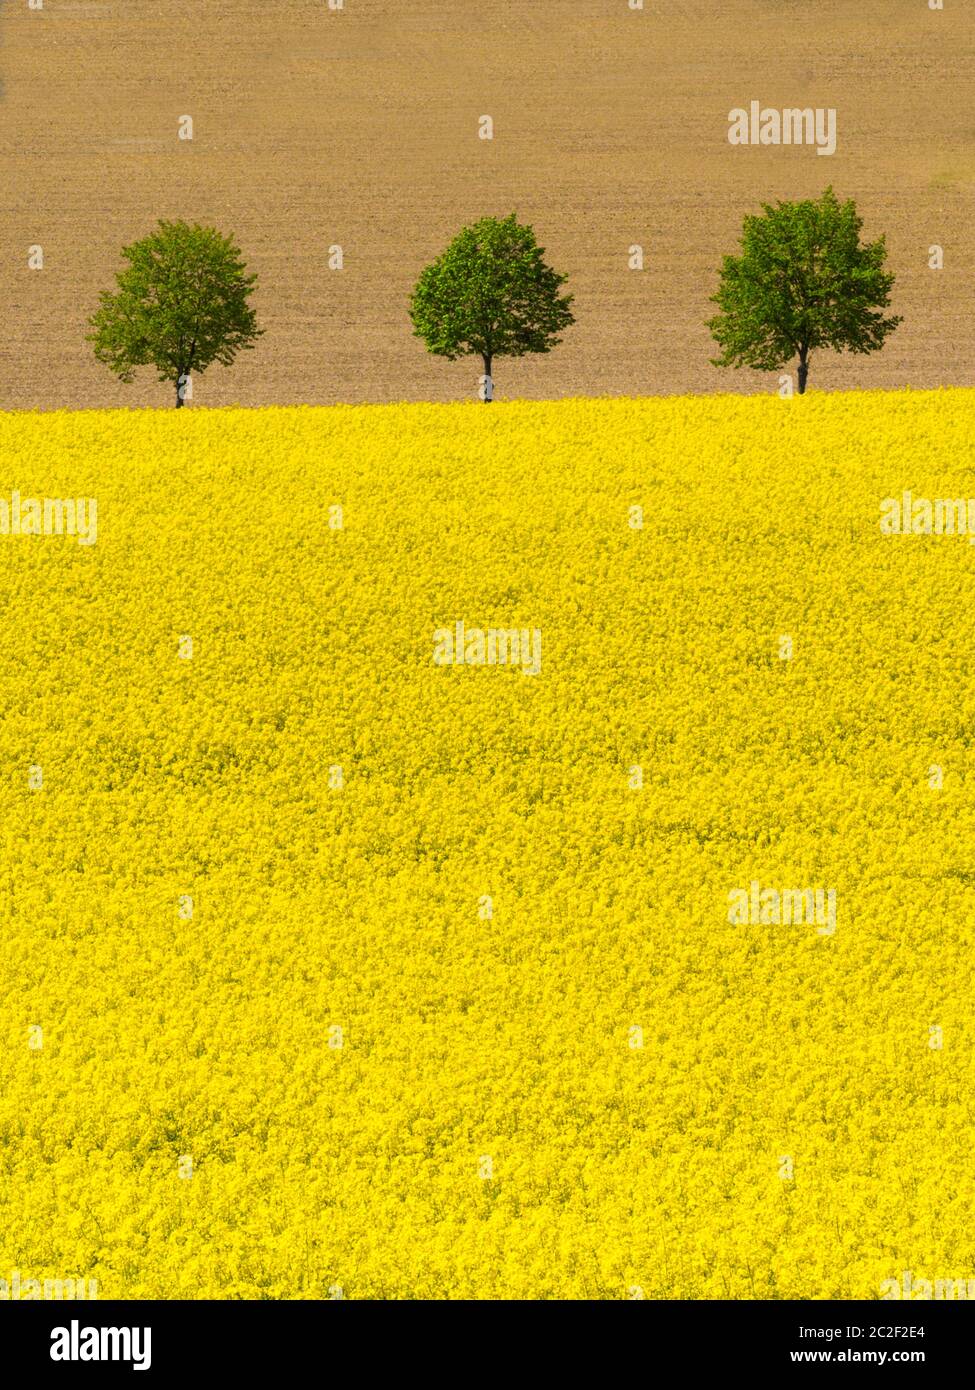 flowering rapeseed field with trees in spring Stock Photo